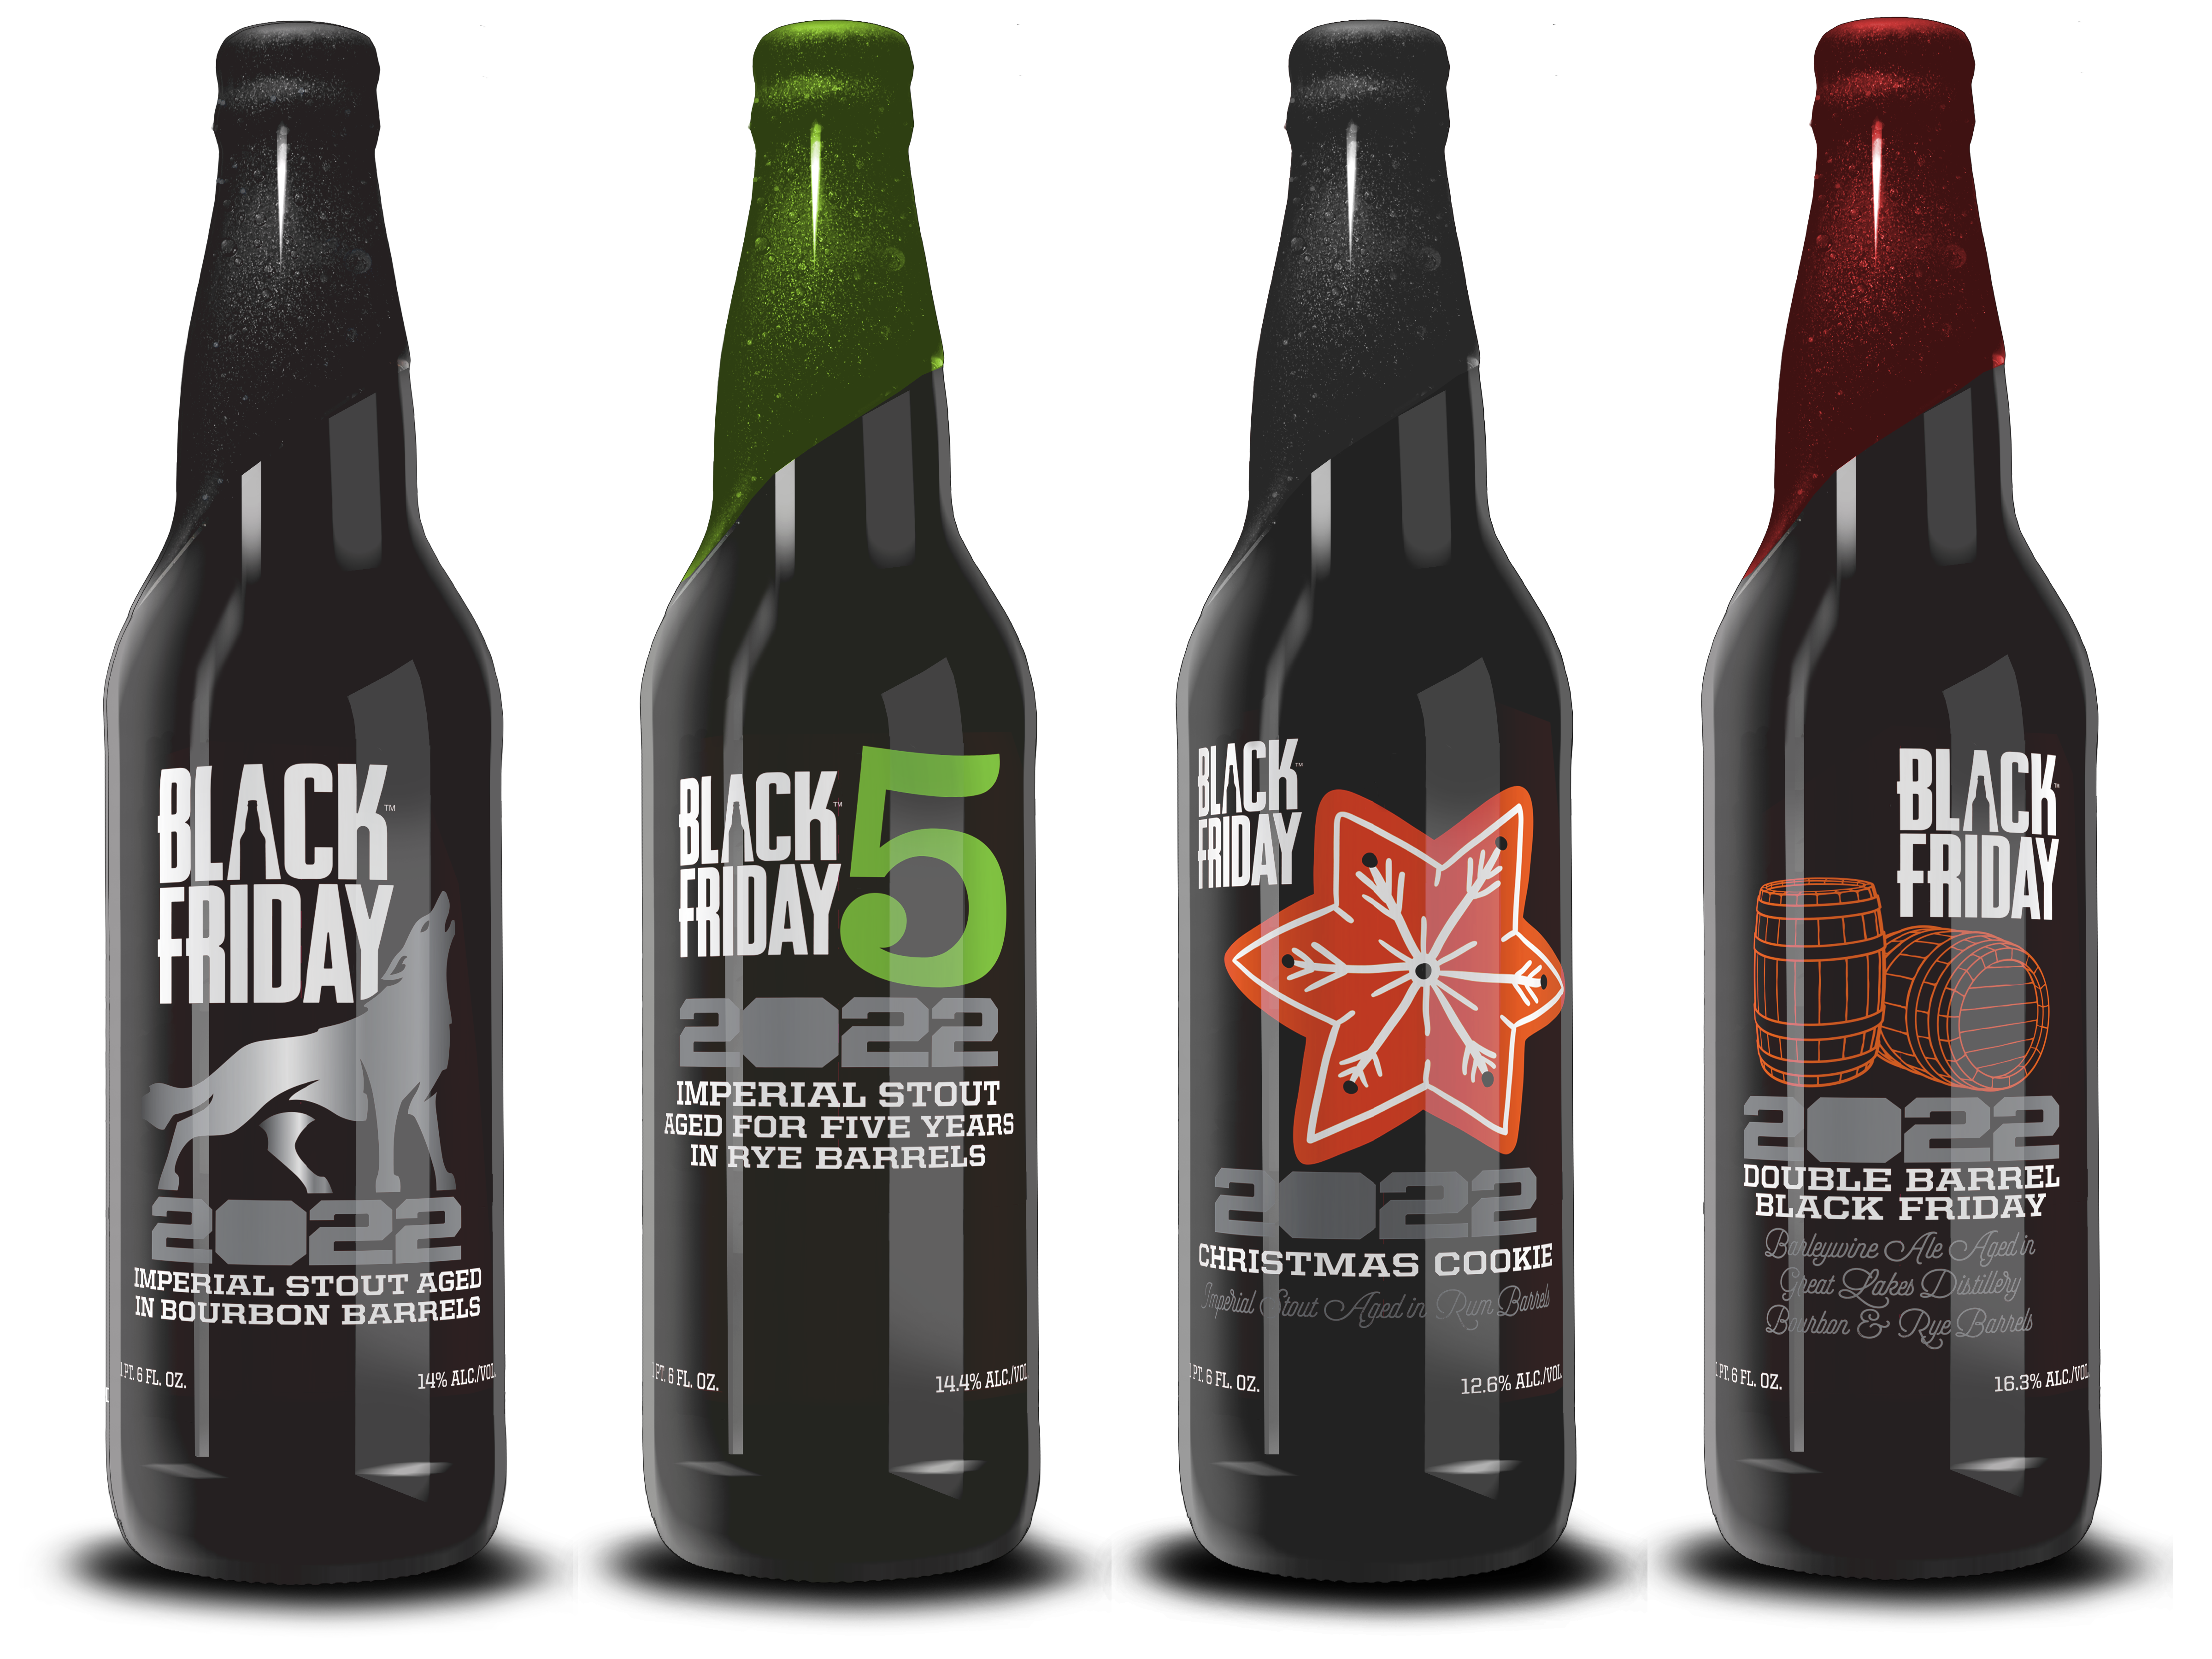 Lakefront Brewery Announces Their Black Friday™ Event is Nearly Here!